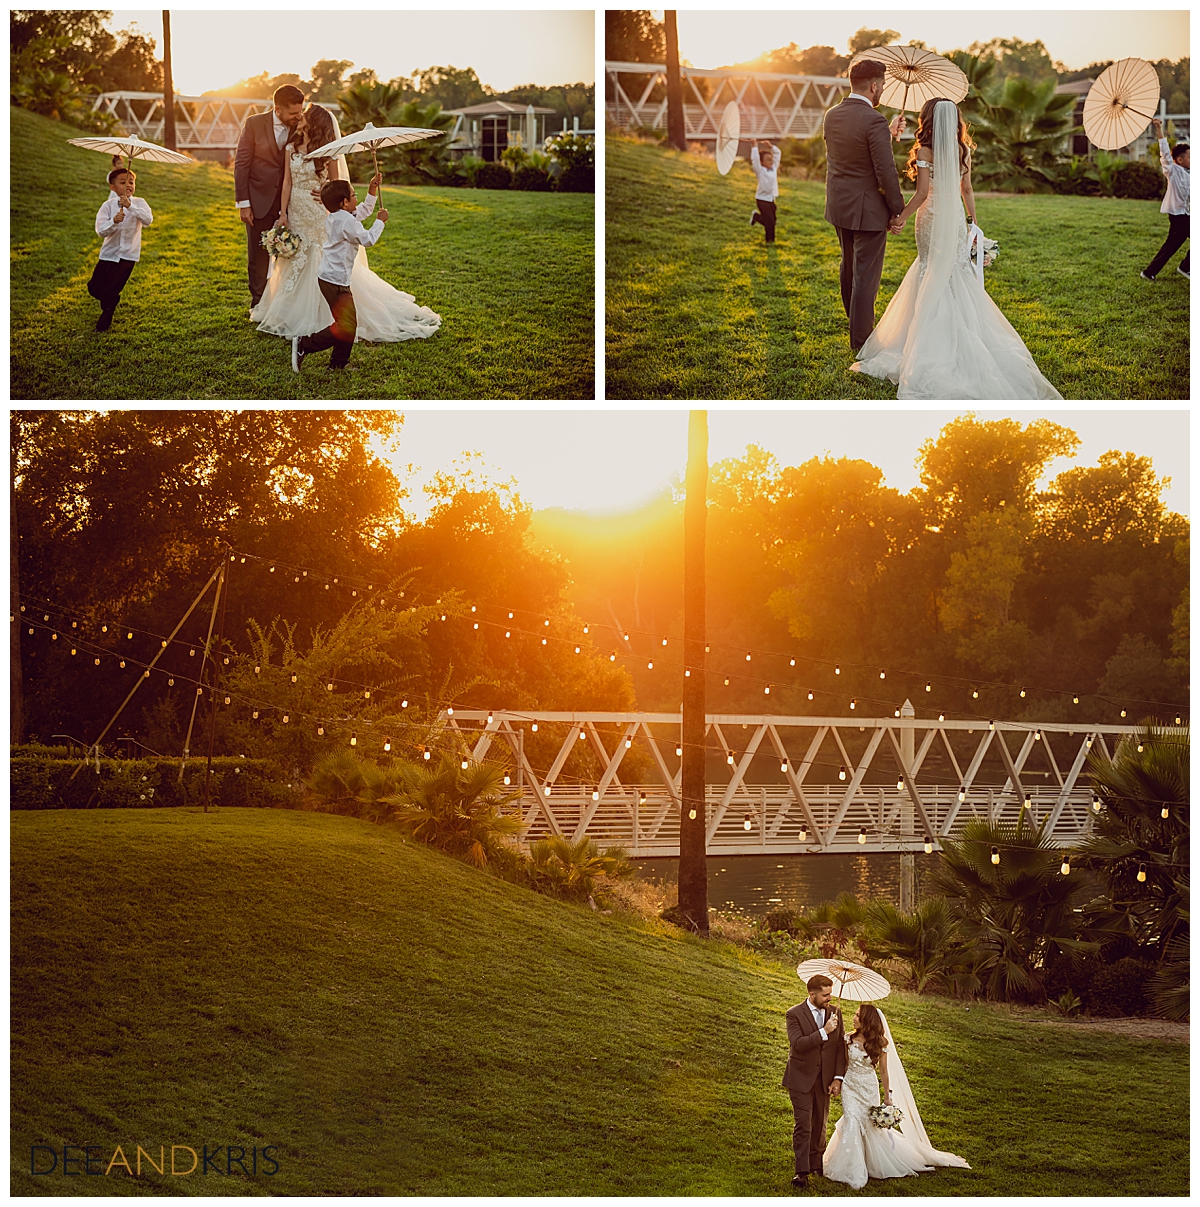 Three images of bride and groom with children dancing around them carrying parasols.